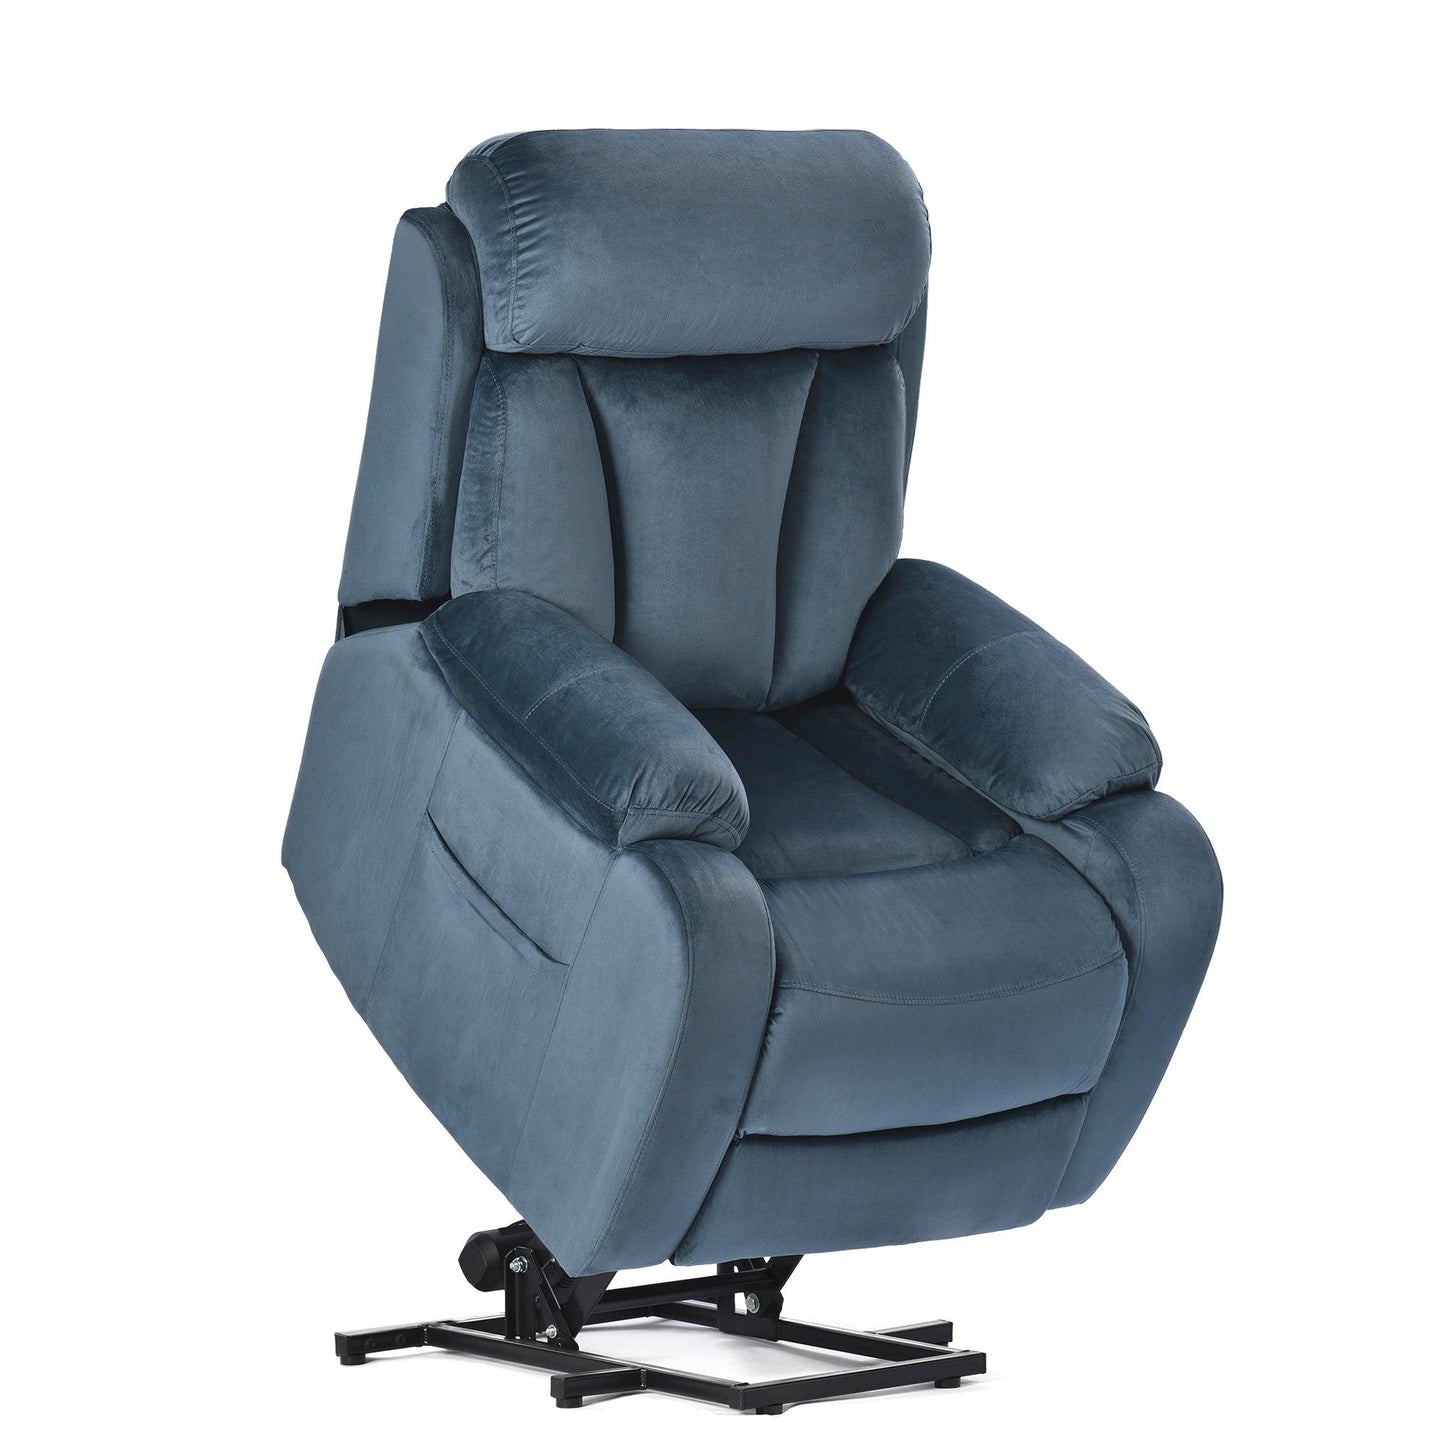 Lift Chair Recliner with Power Lift Assistance, Adjustable Angles, and Anti-Skid Stability, Navy Blue FredCo